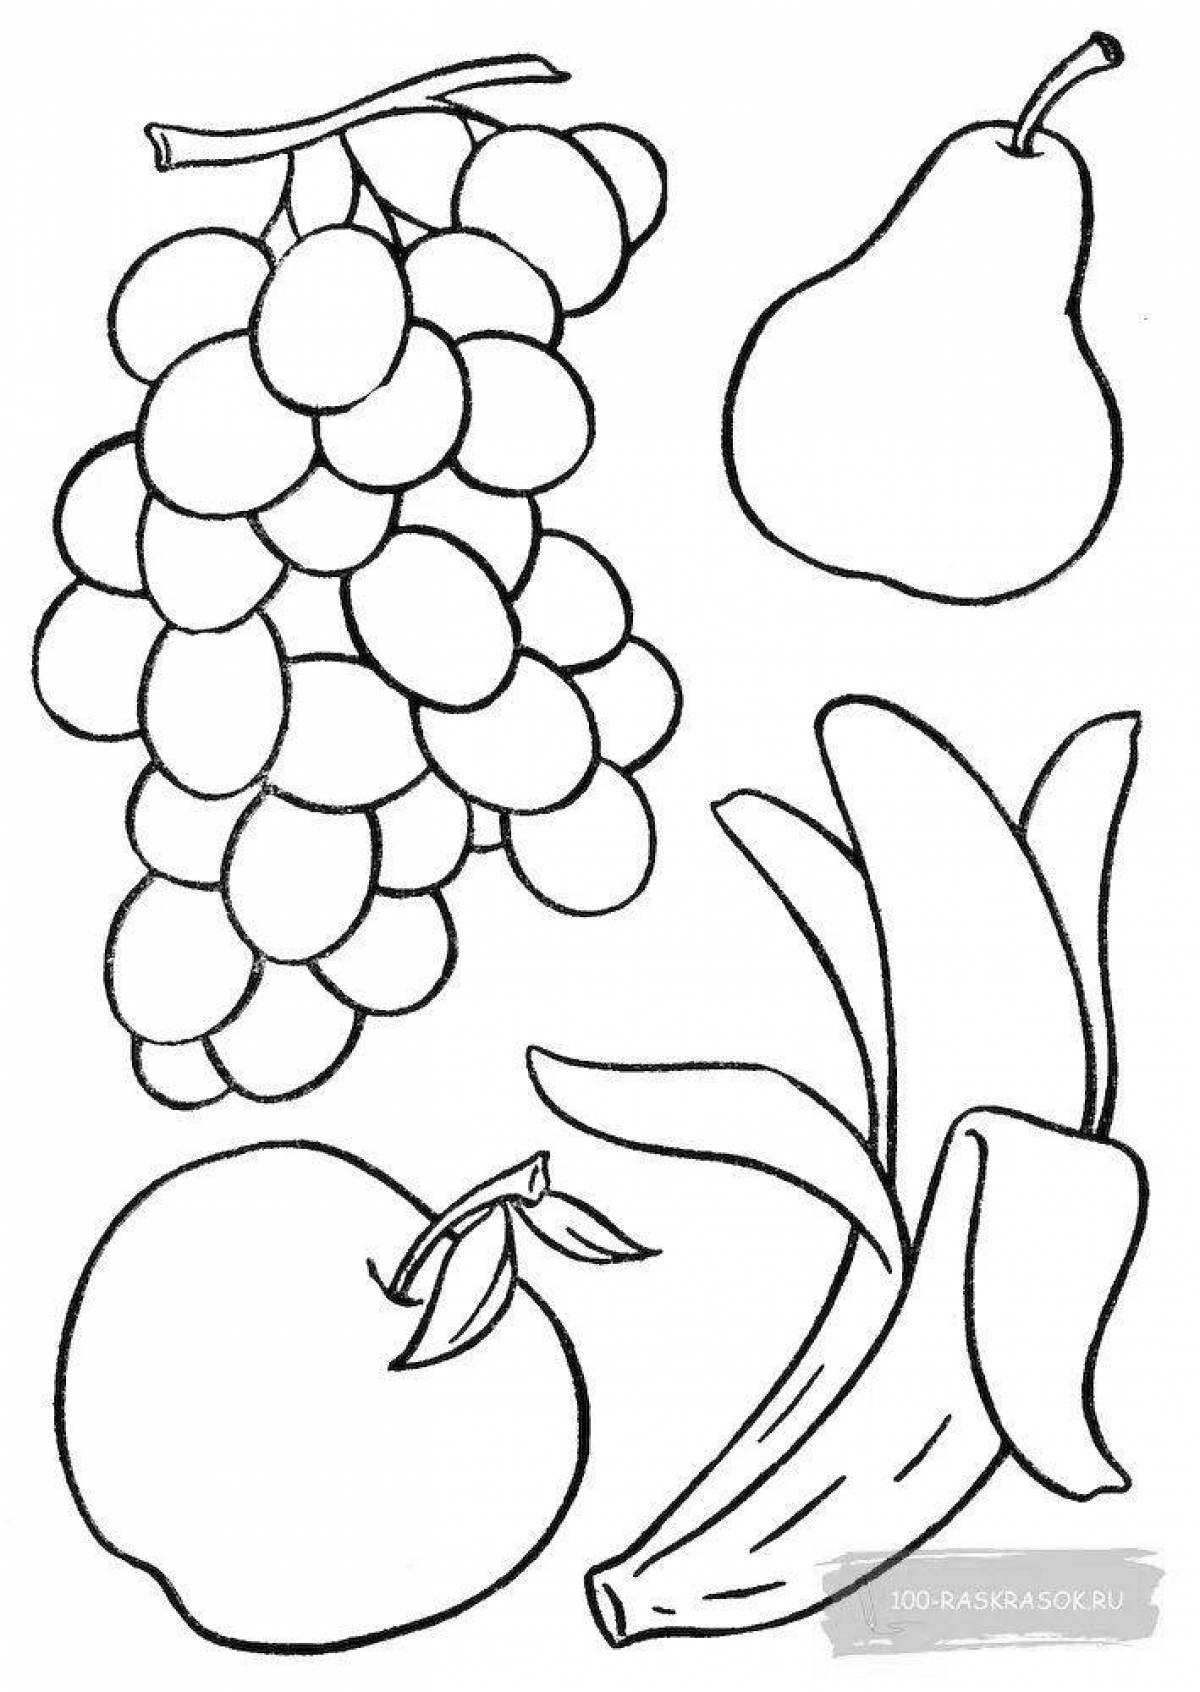 Inspiring fruit coloring pages for kids